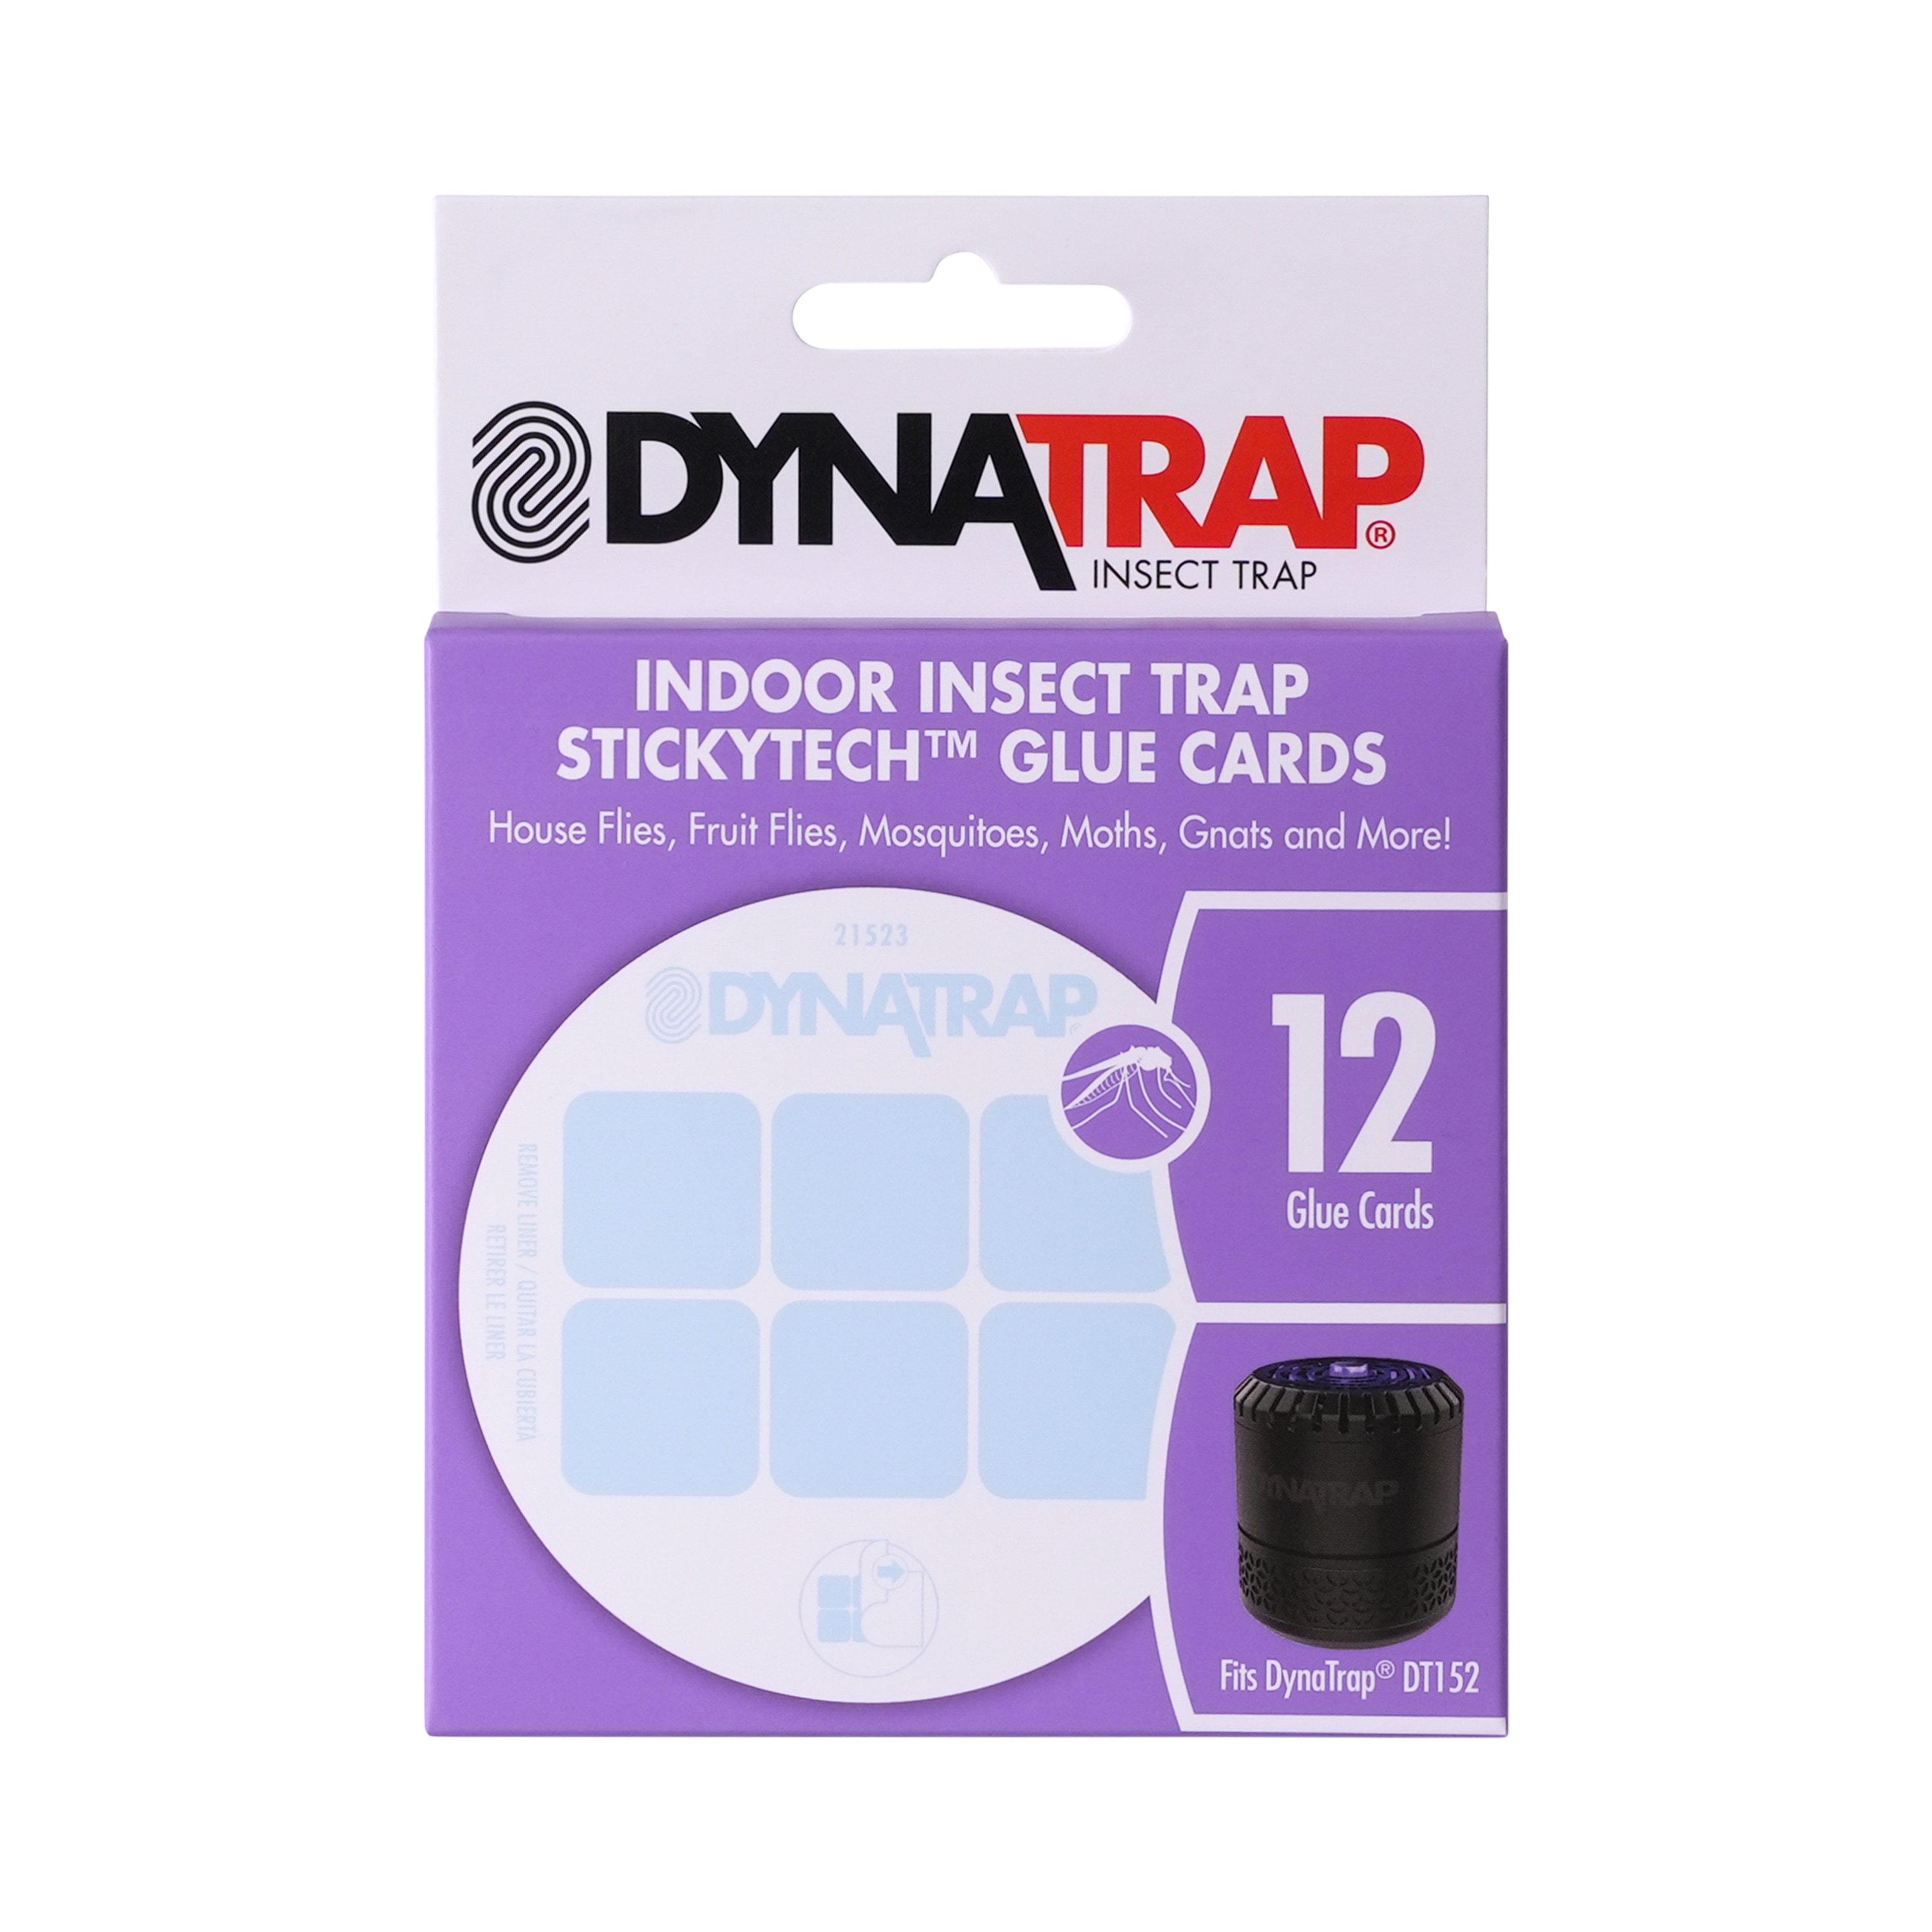 DynaTrap Insect Trap with Pole Mount - Sam's Club